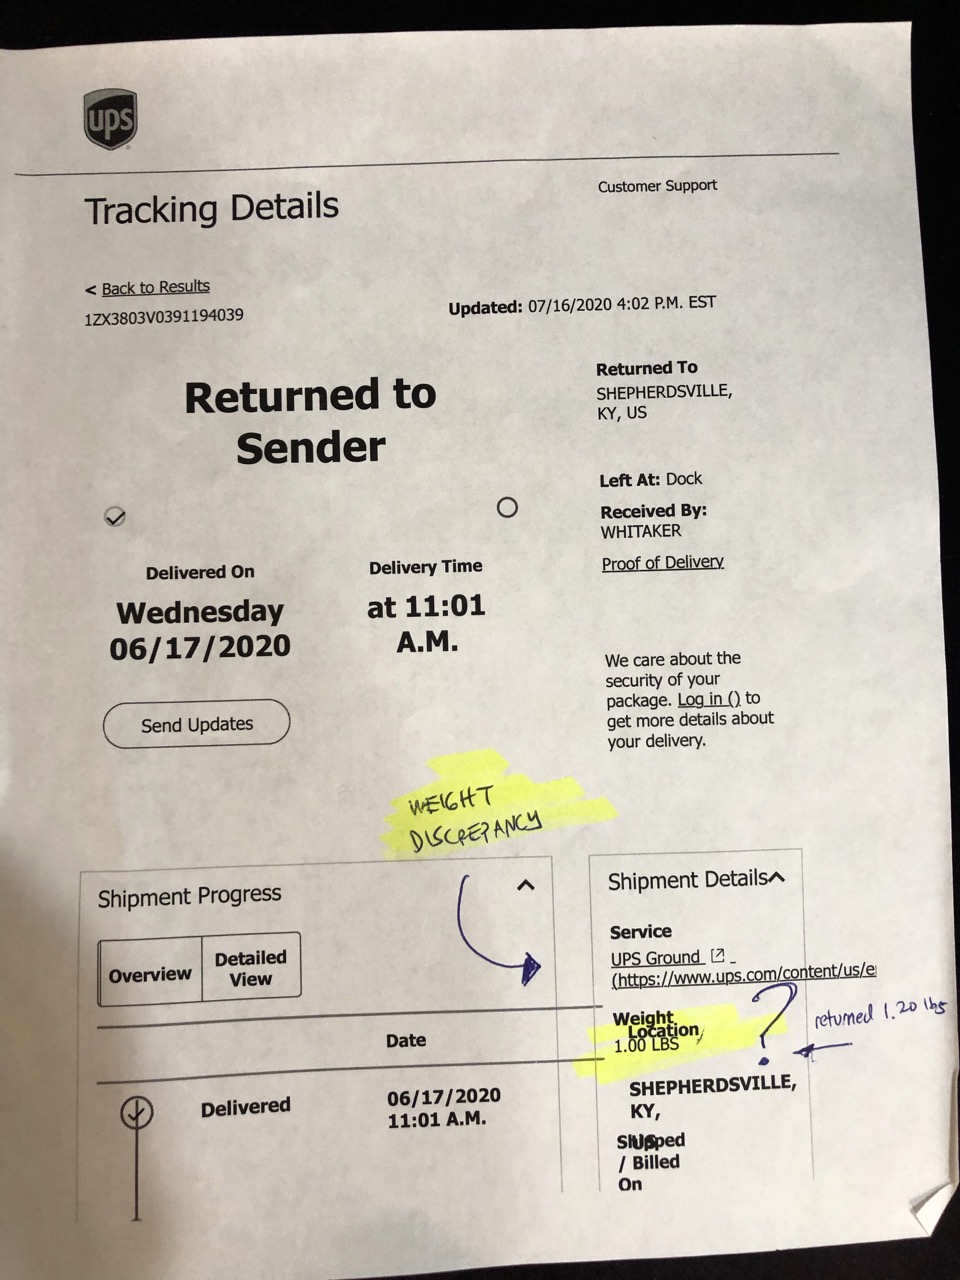 Tracking return to sender with lesser weight